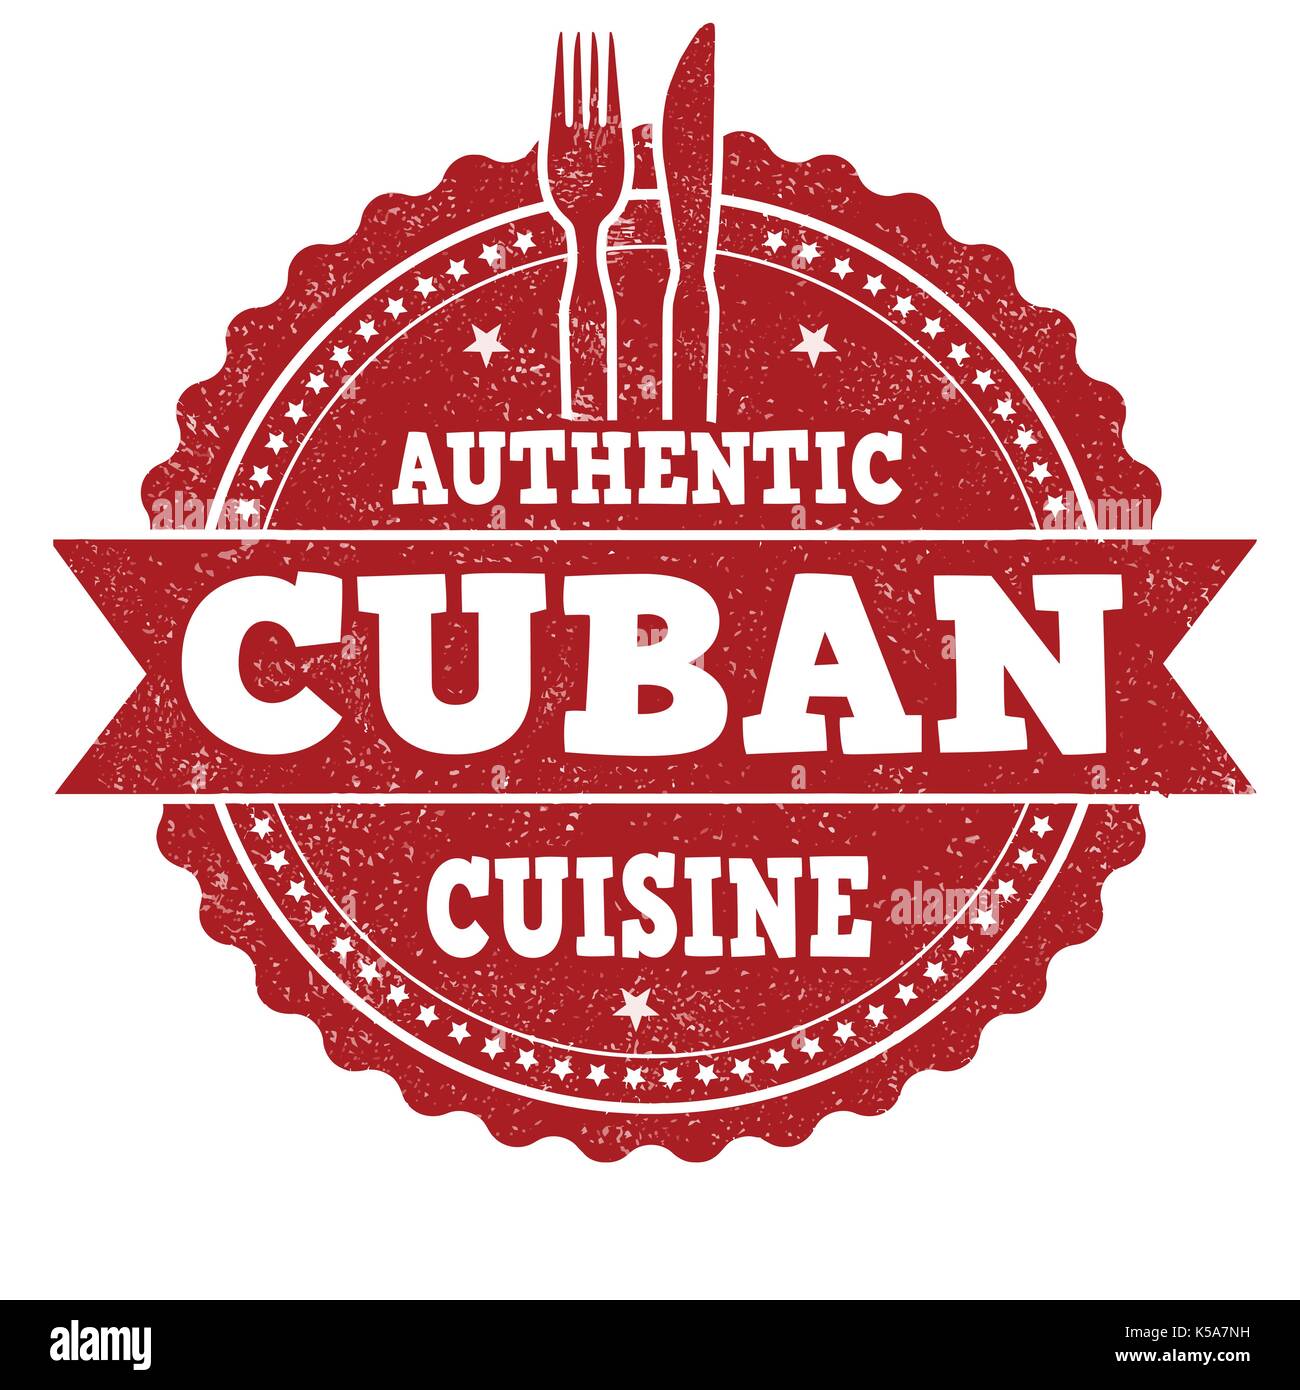 Authentic Cuban cuisine sign or stamp on white background, vector illustration Stock Vector